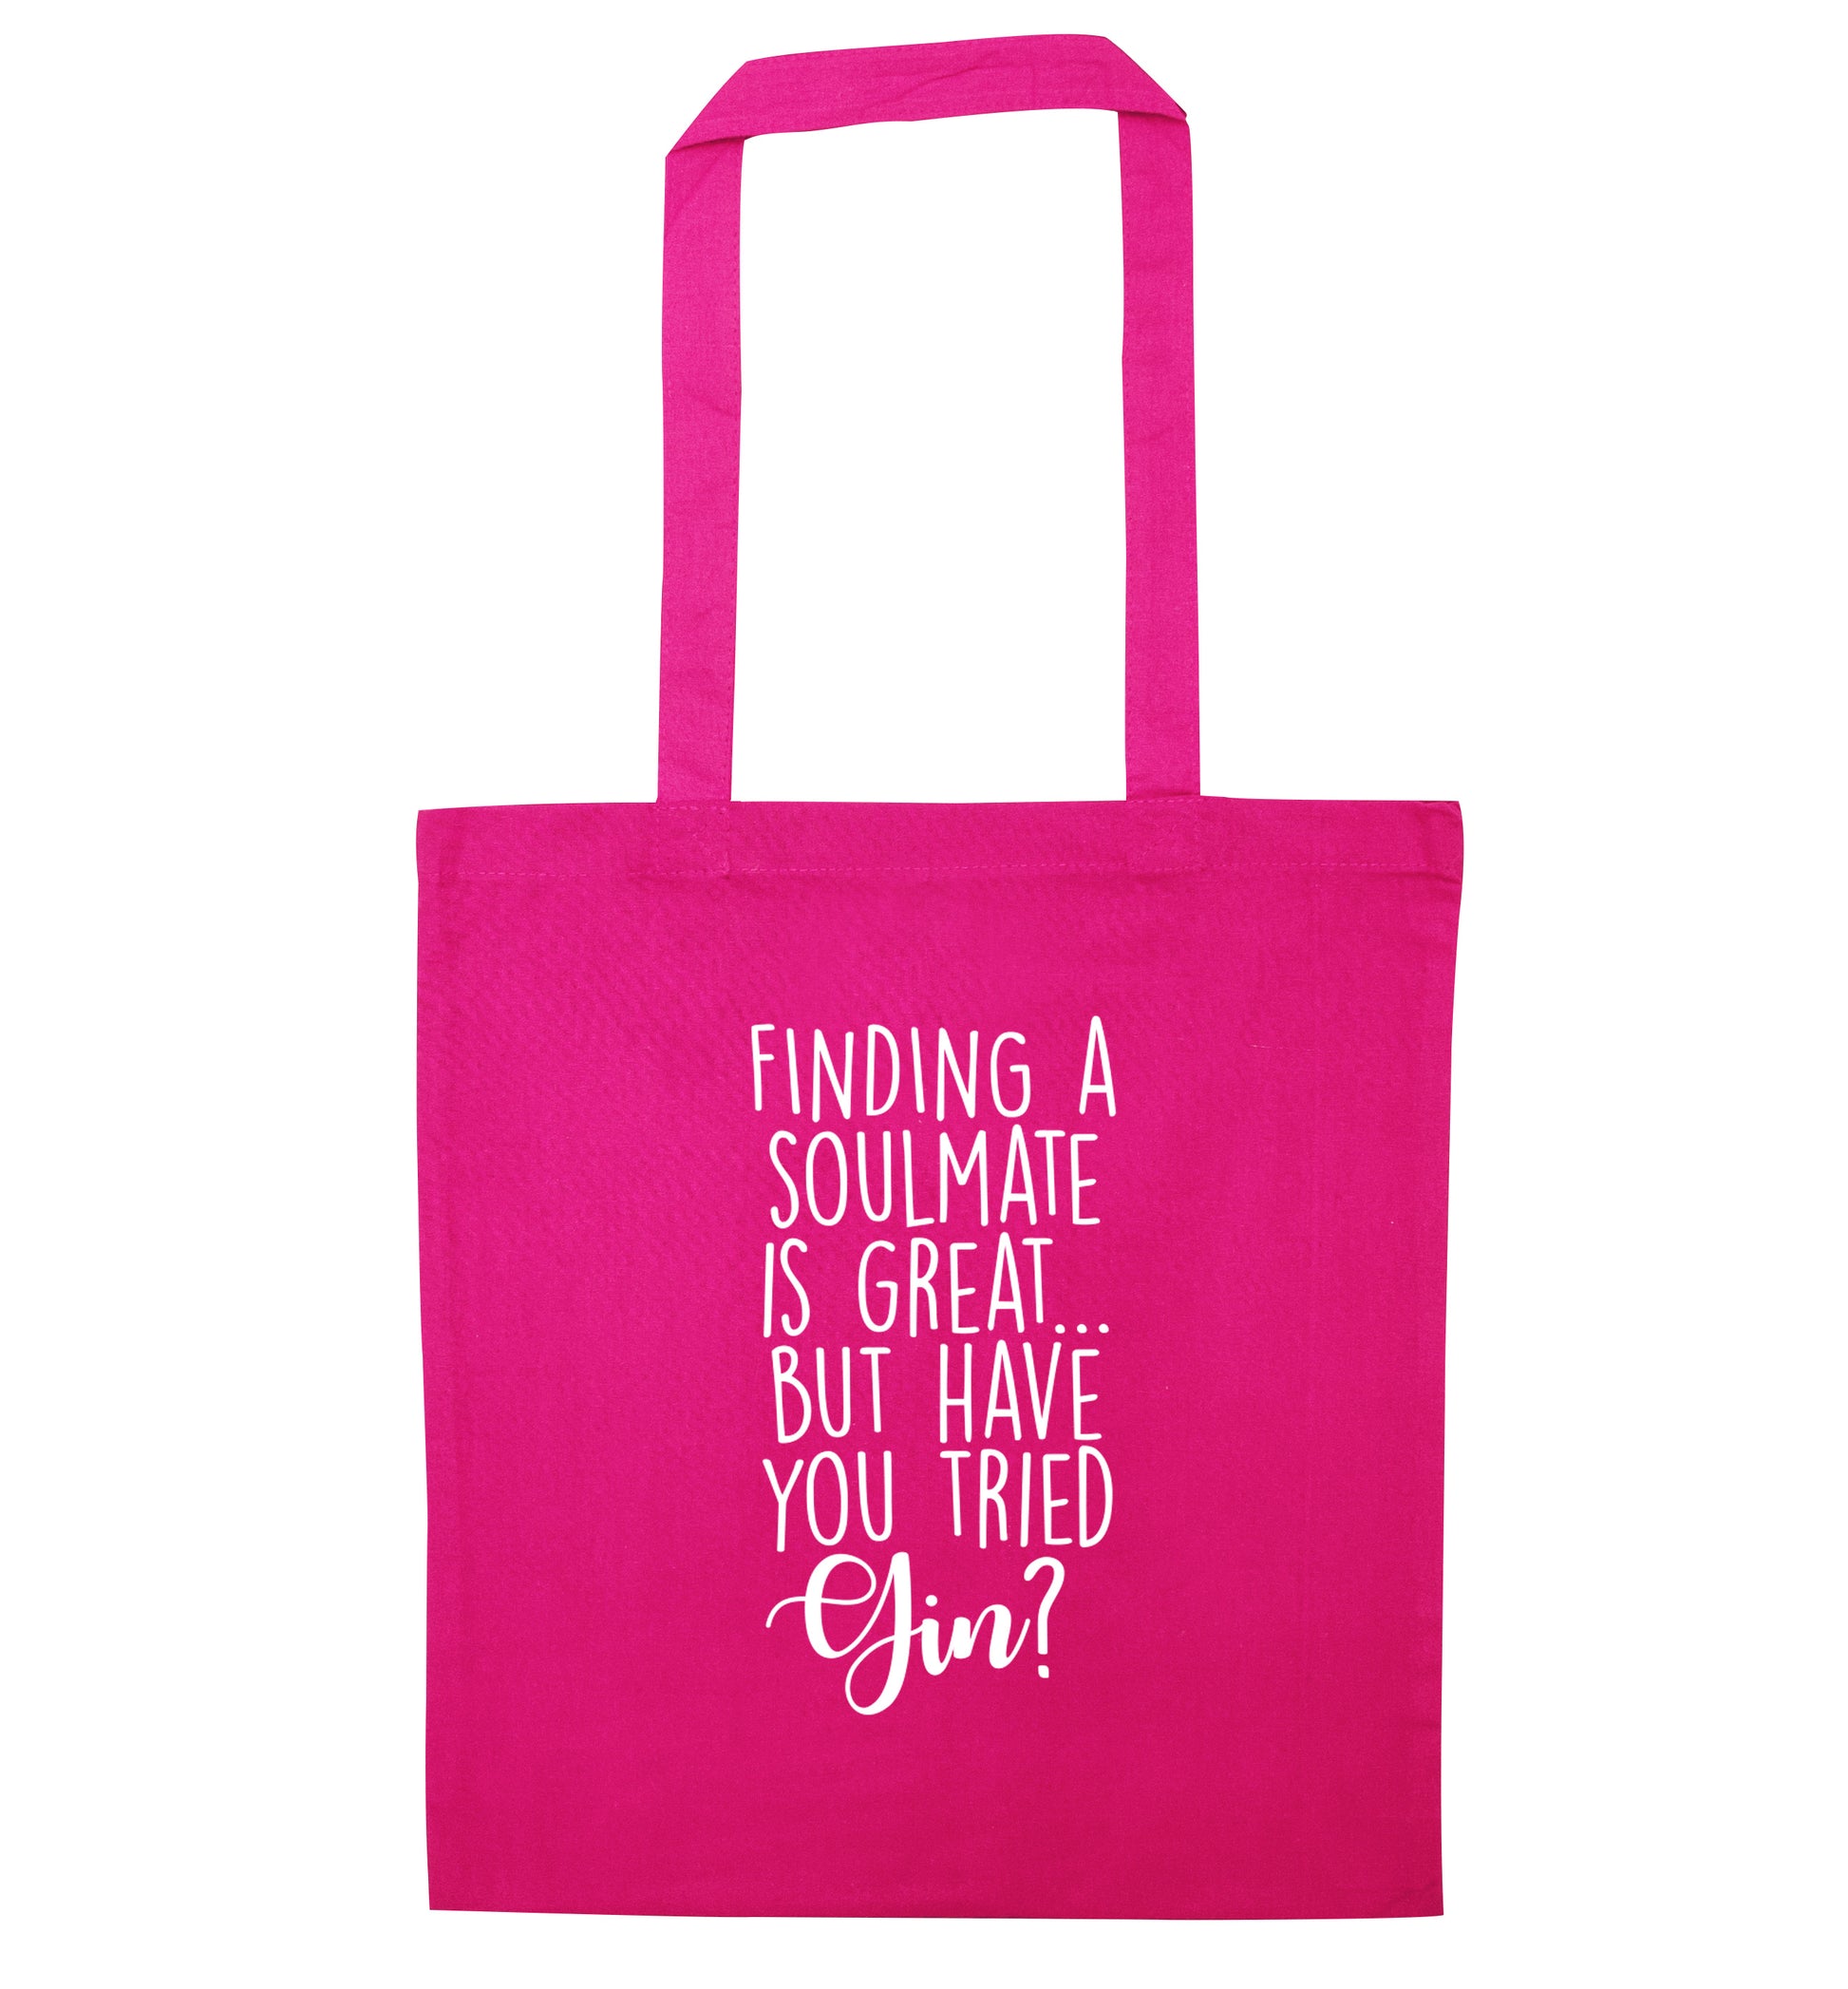 Finding a soulmate is great but have you tried gin? pink tote bag